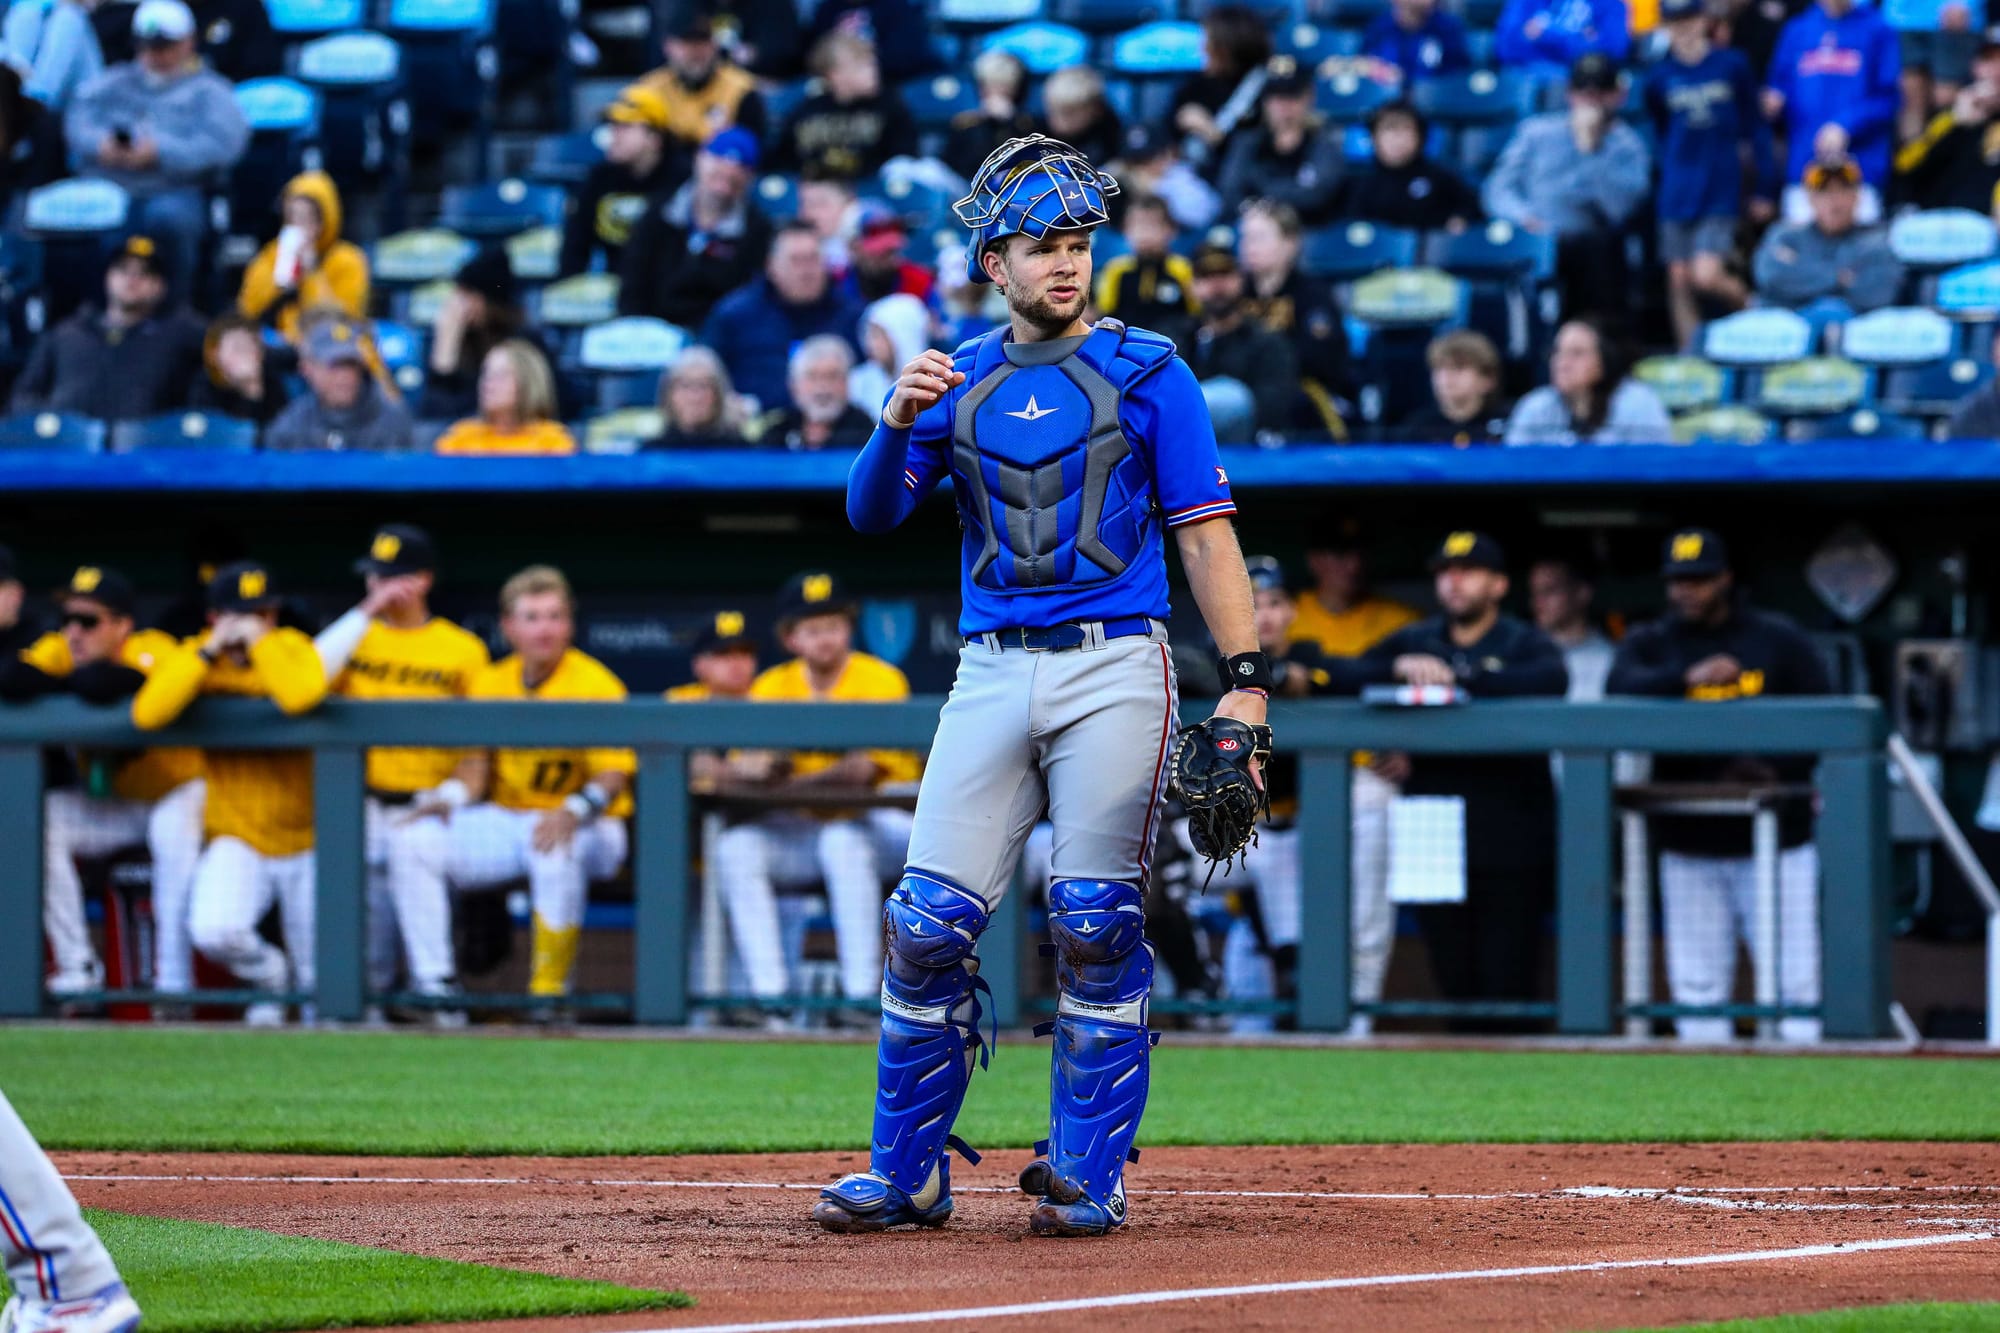 Patient approach at the plate lands Jake English in KU record book